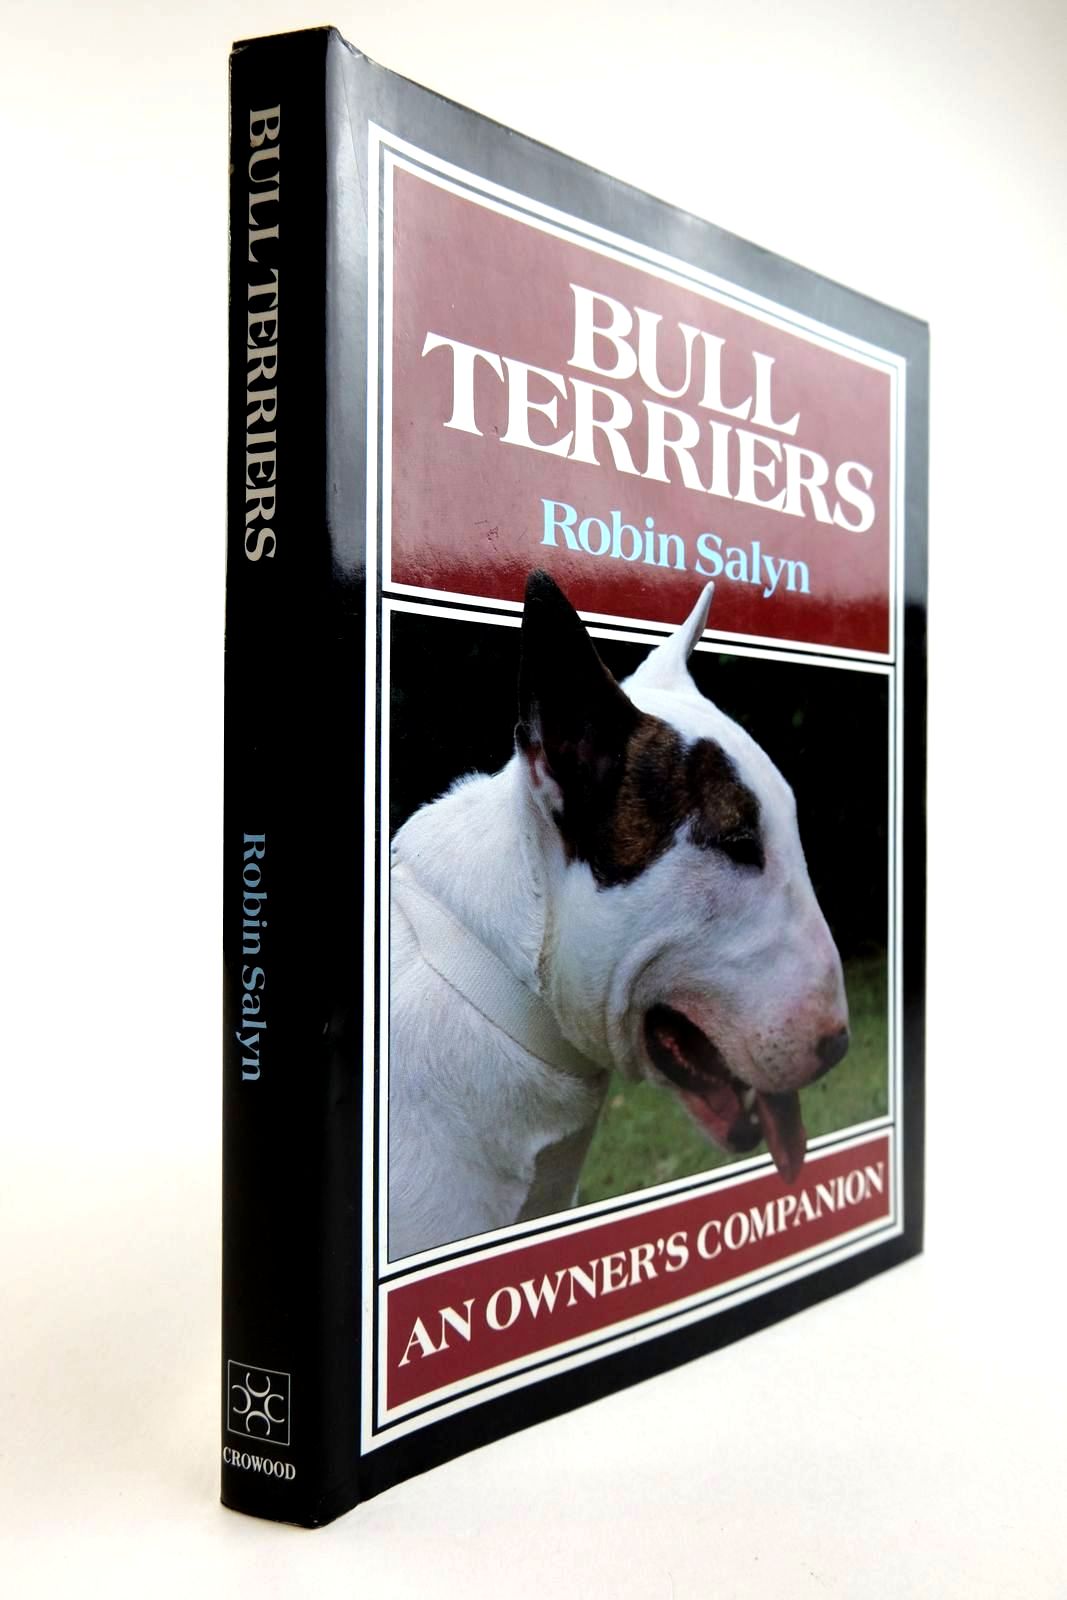 Photo of BULL TERRIERS written by Salyn, Robin published by The Crowood Press (STOCK CODE: 2134300)  for sale by Stella & Rose's Books